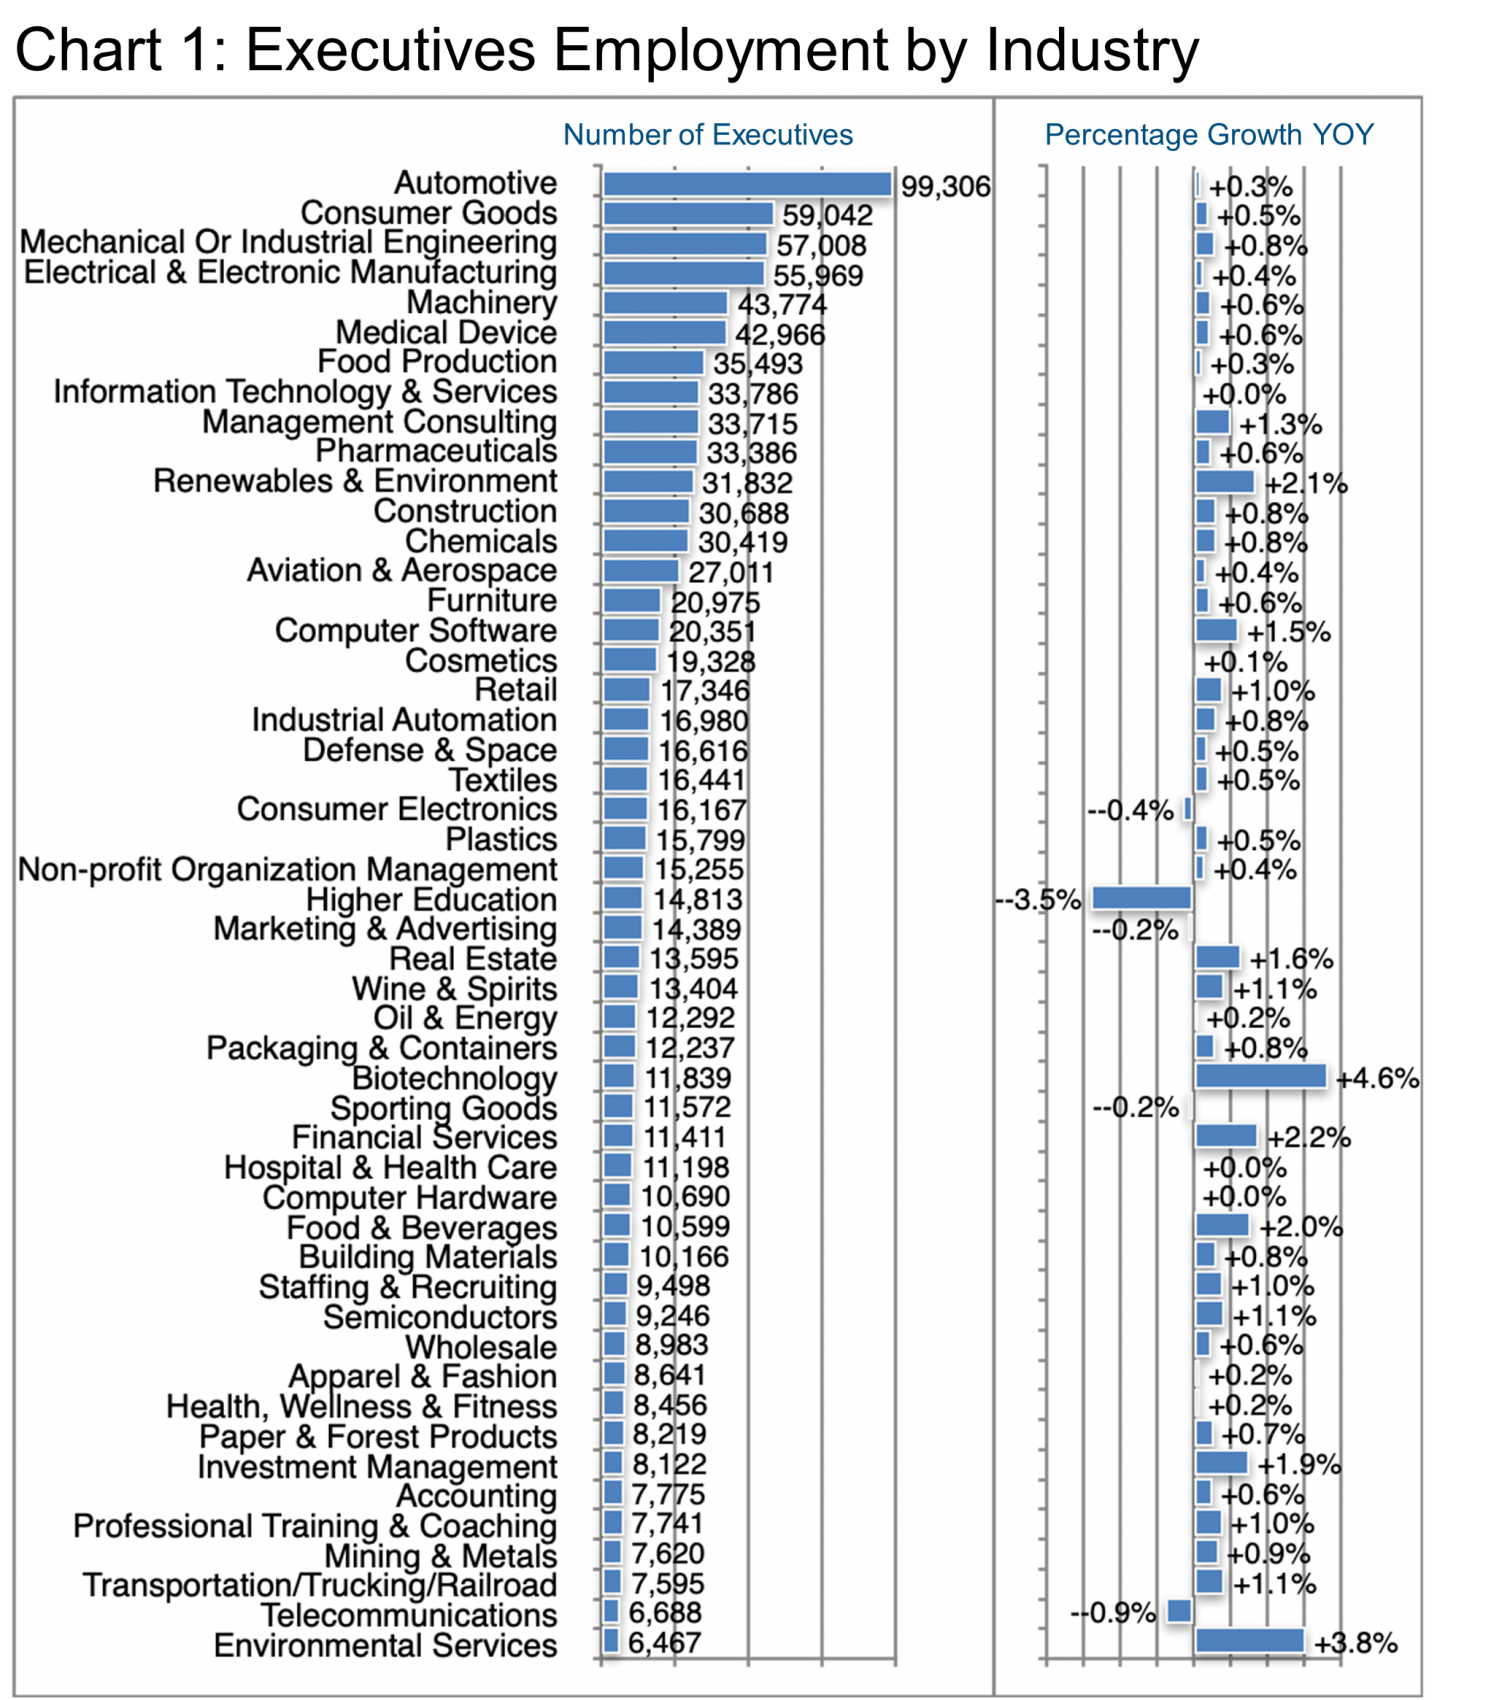 Chart 1_Executives Employment by Industry